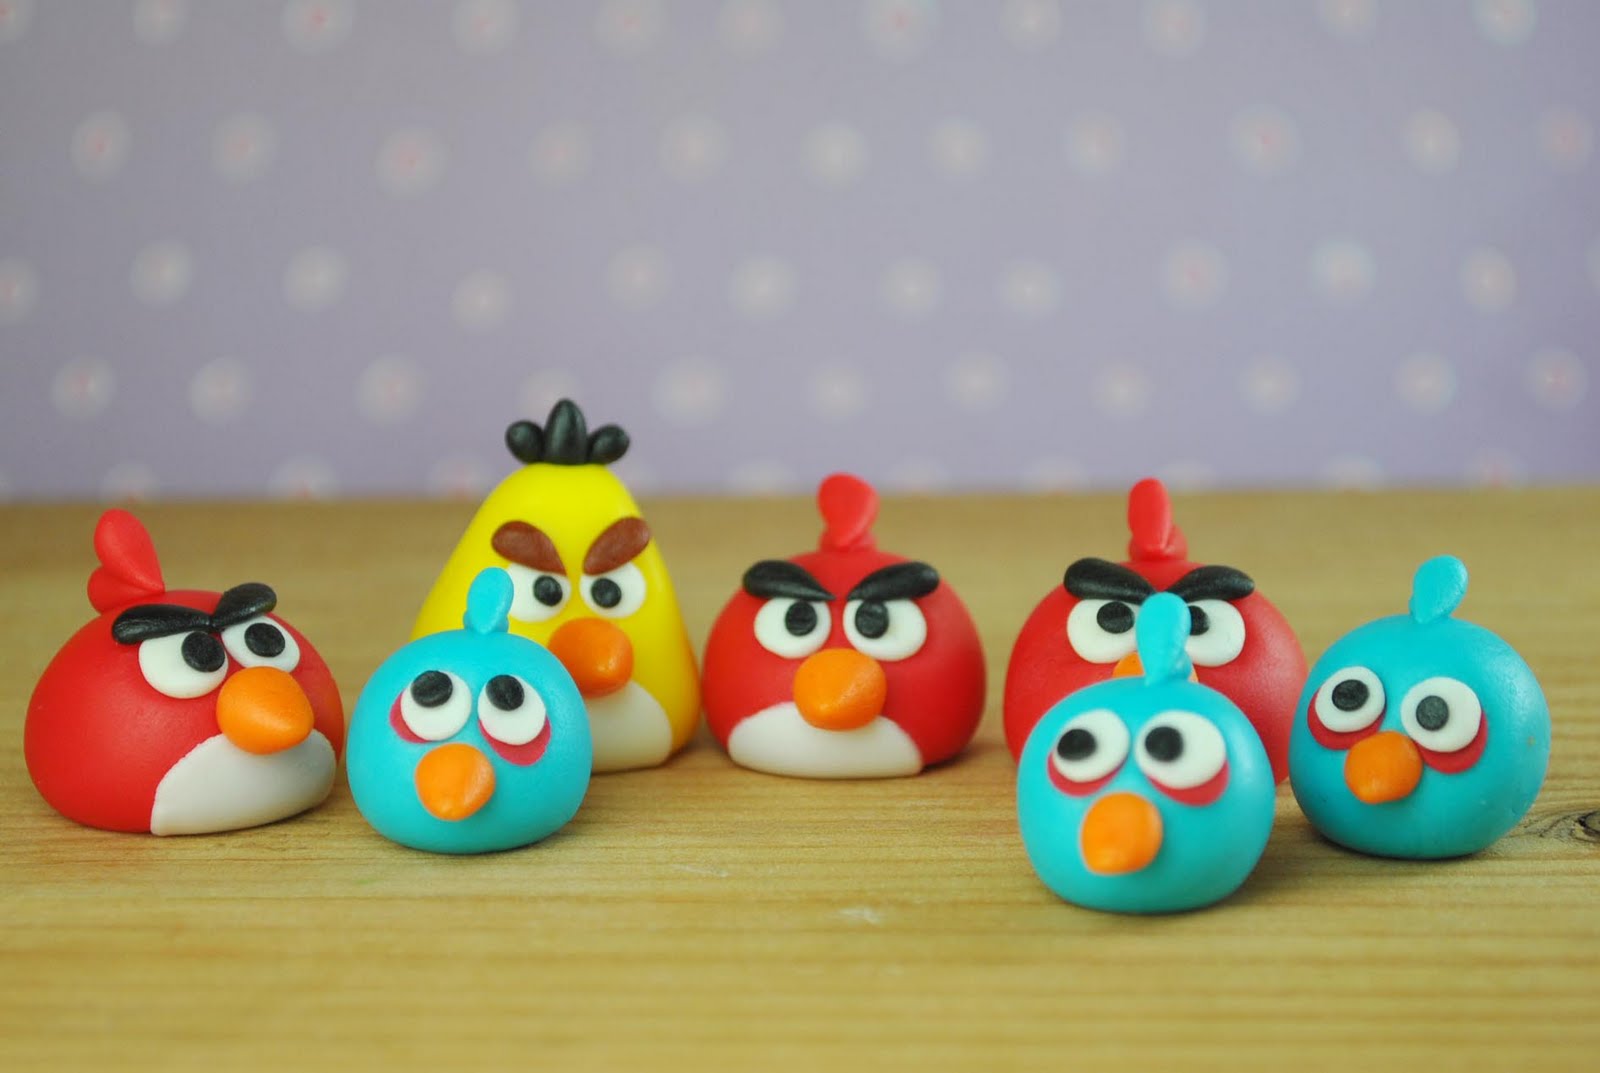 Angry Birds Cake Toppers For Sale